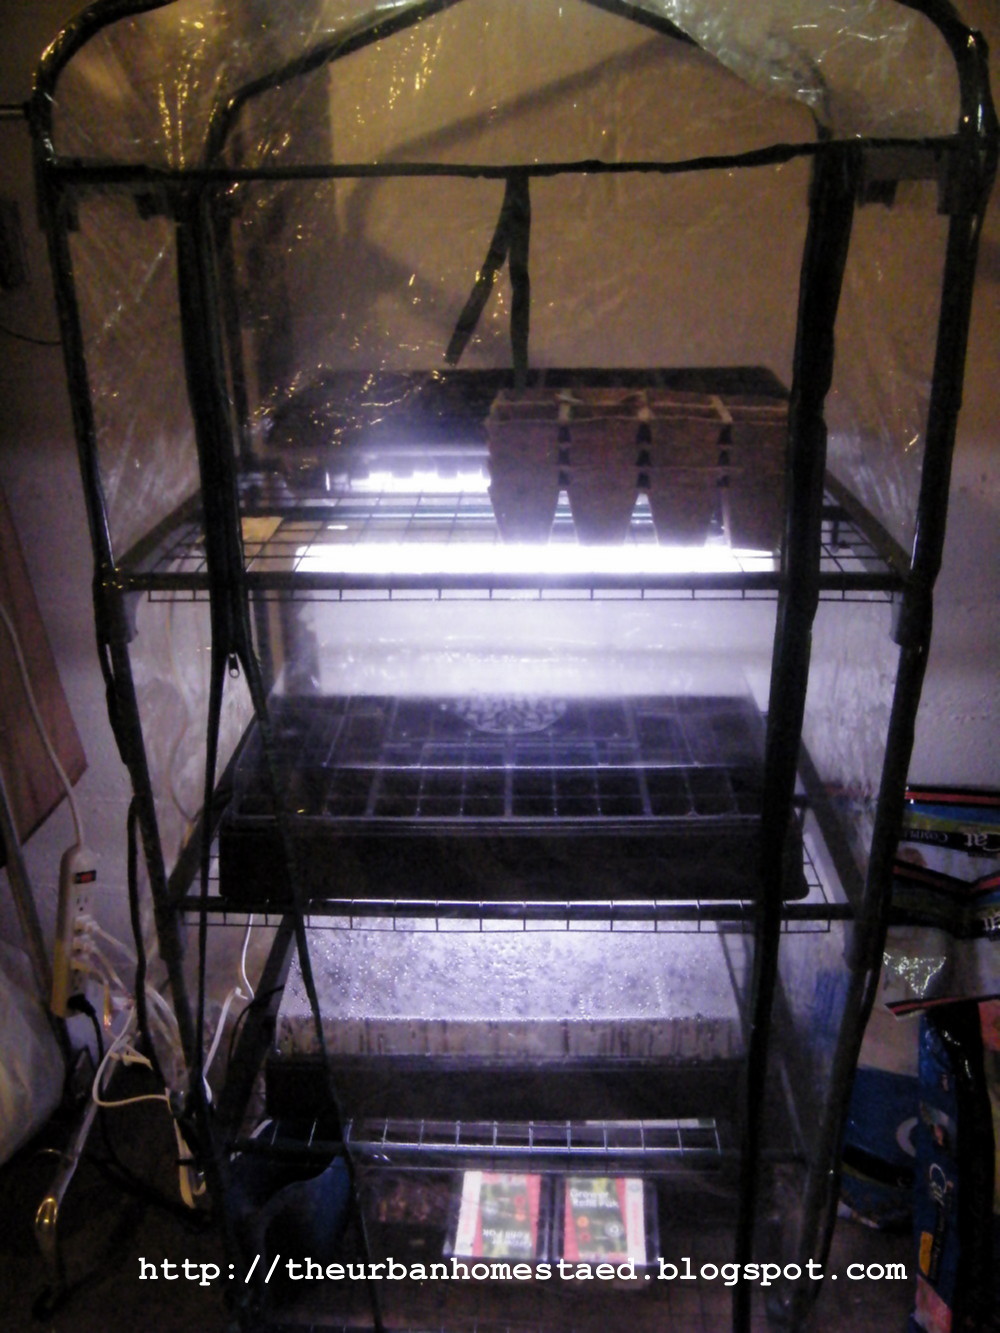  Homestead: DIY Inexpensive Seed Starting Setup or Indoor Greenhouse